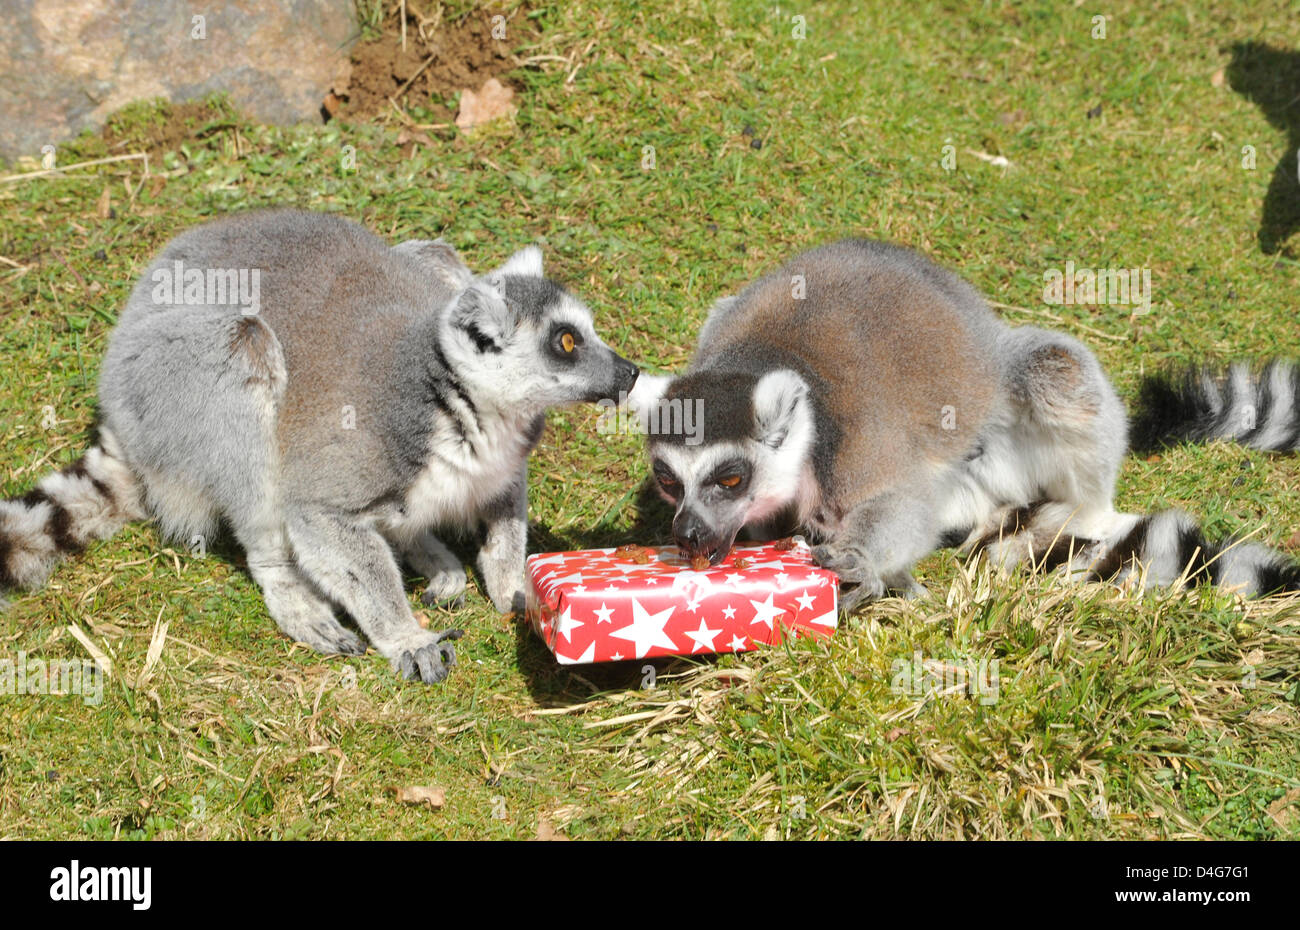 Bedfordshire, UK. 13th March 2013. Keepers at ZSL Whipsnade Zoo are preparing to celebrate two very special birthdays tomorrow –as ring-tailed lemur twins, Billy and Taffy, turn 25 today.        The pair, who are thought to be the oldest lemur twins in the world, will be treated to a special birthday cake made of fruit, and presents full of their favourite treats to unwrap, along with piñatas in the shape of a 25 to mark their day.         Their birthday is a significant milestone as lemurs rarely live past the age of 20. Credit Brian Jordan/Alamy Live News Stock Photo